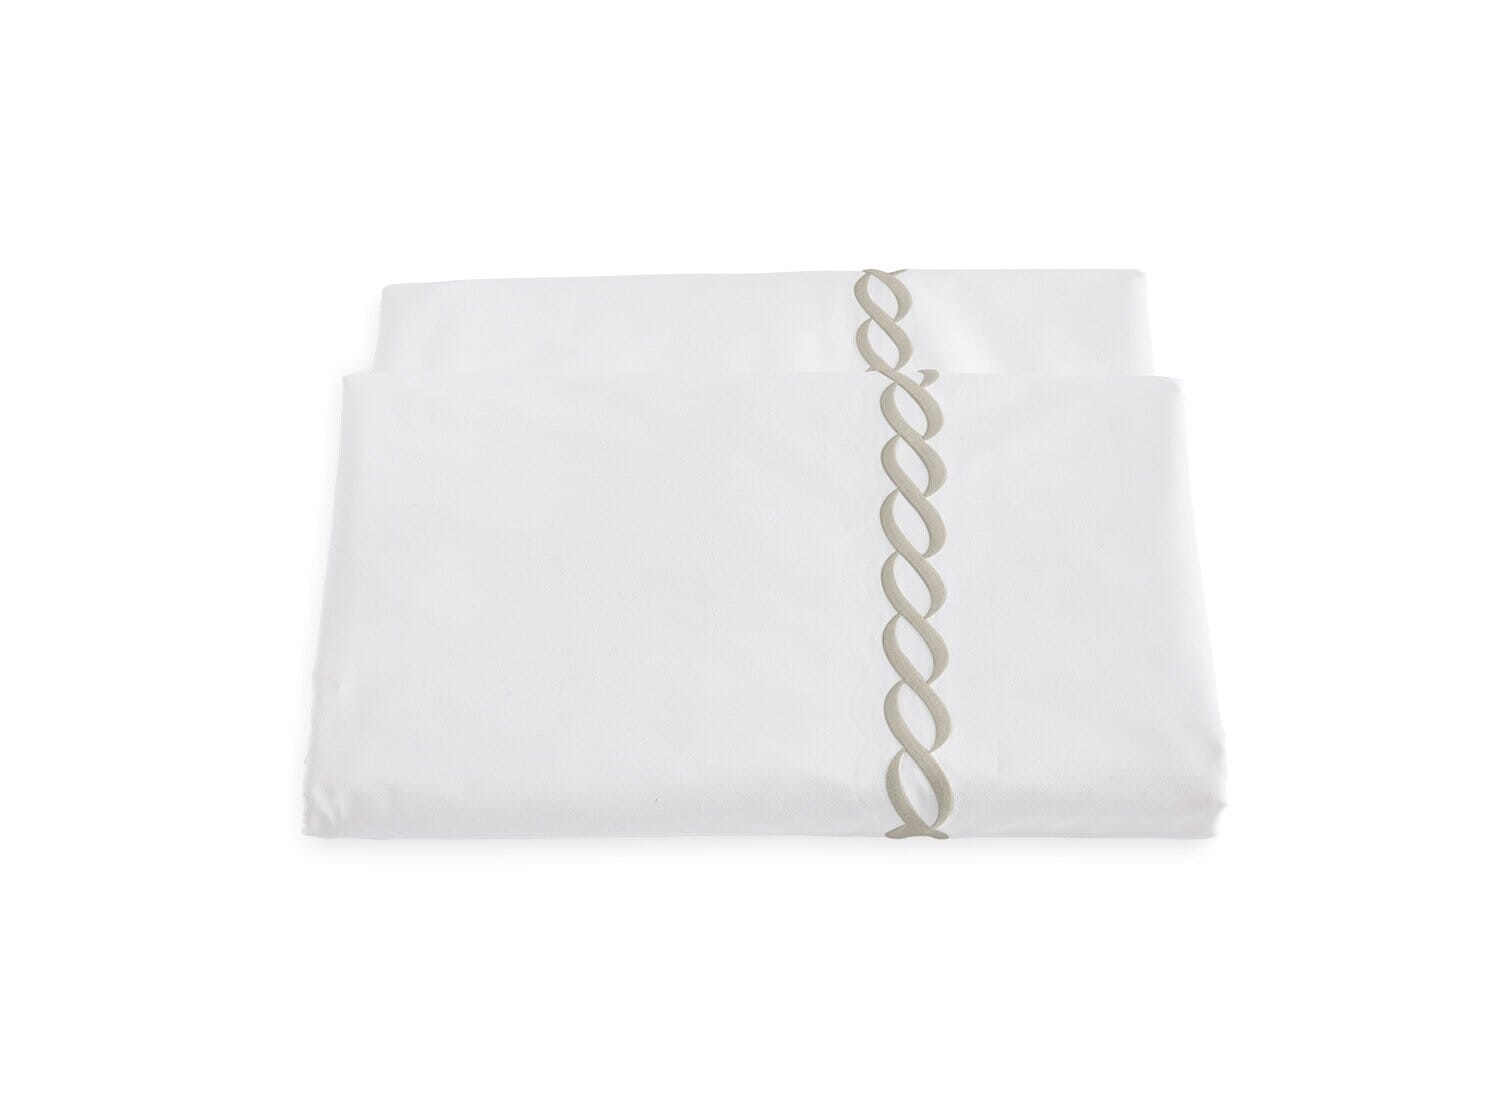 Duvet Cover - Classic Chain Percale Almond Bedding by Matouk at Fig Linens and Home